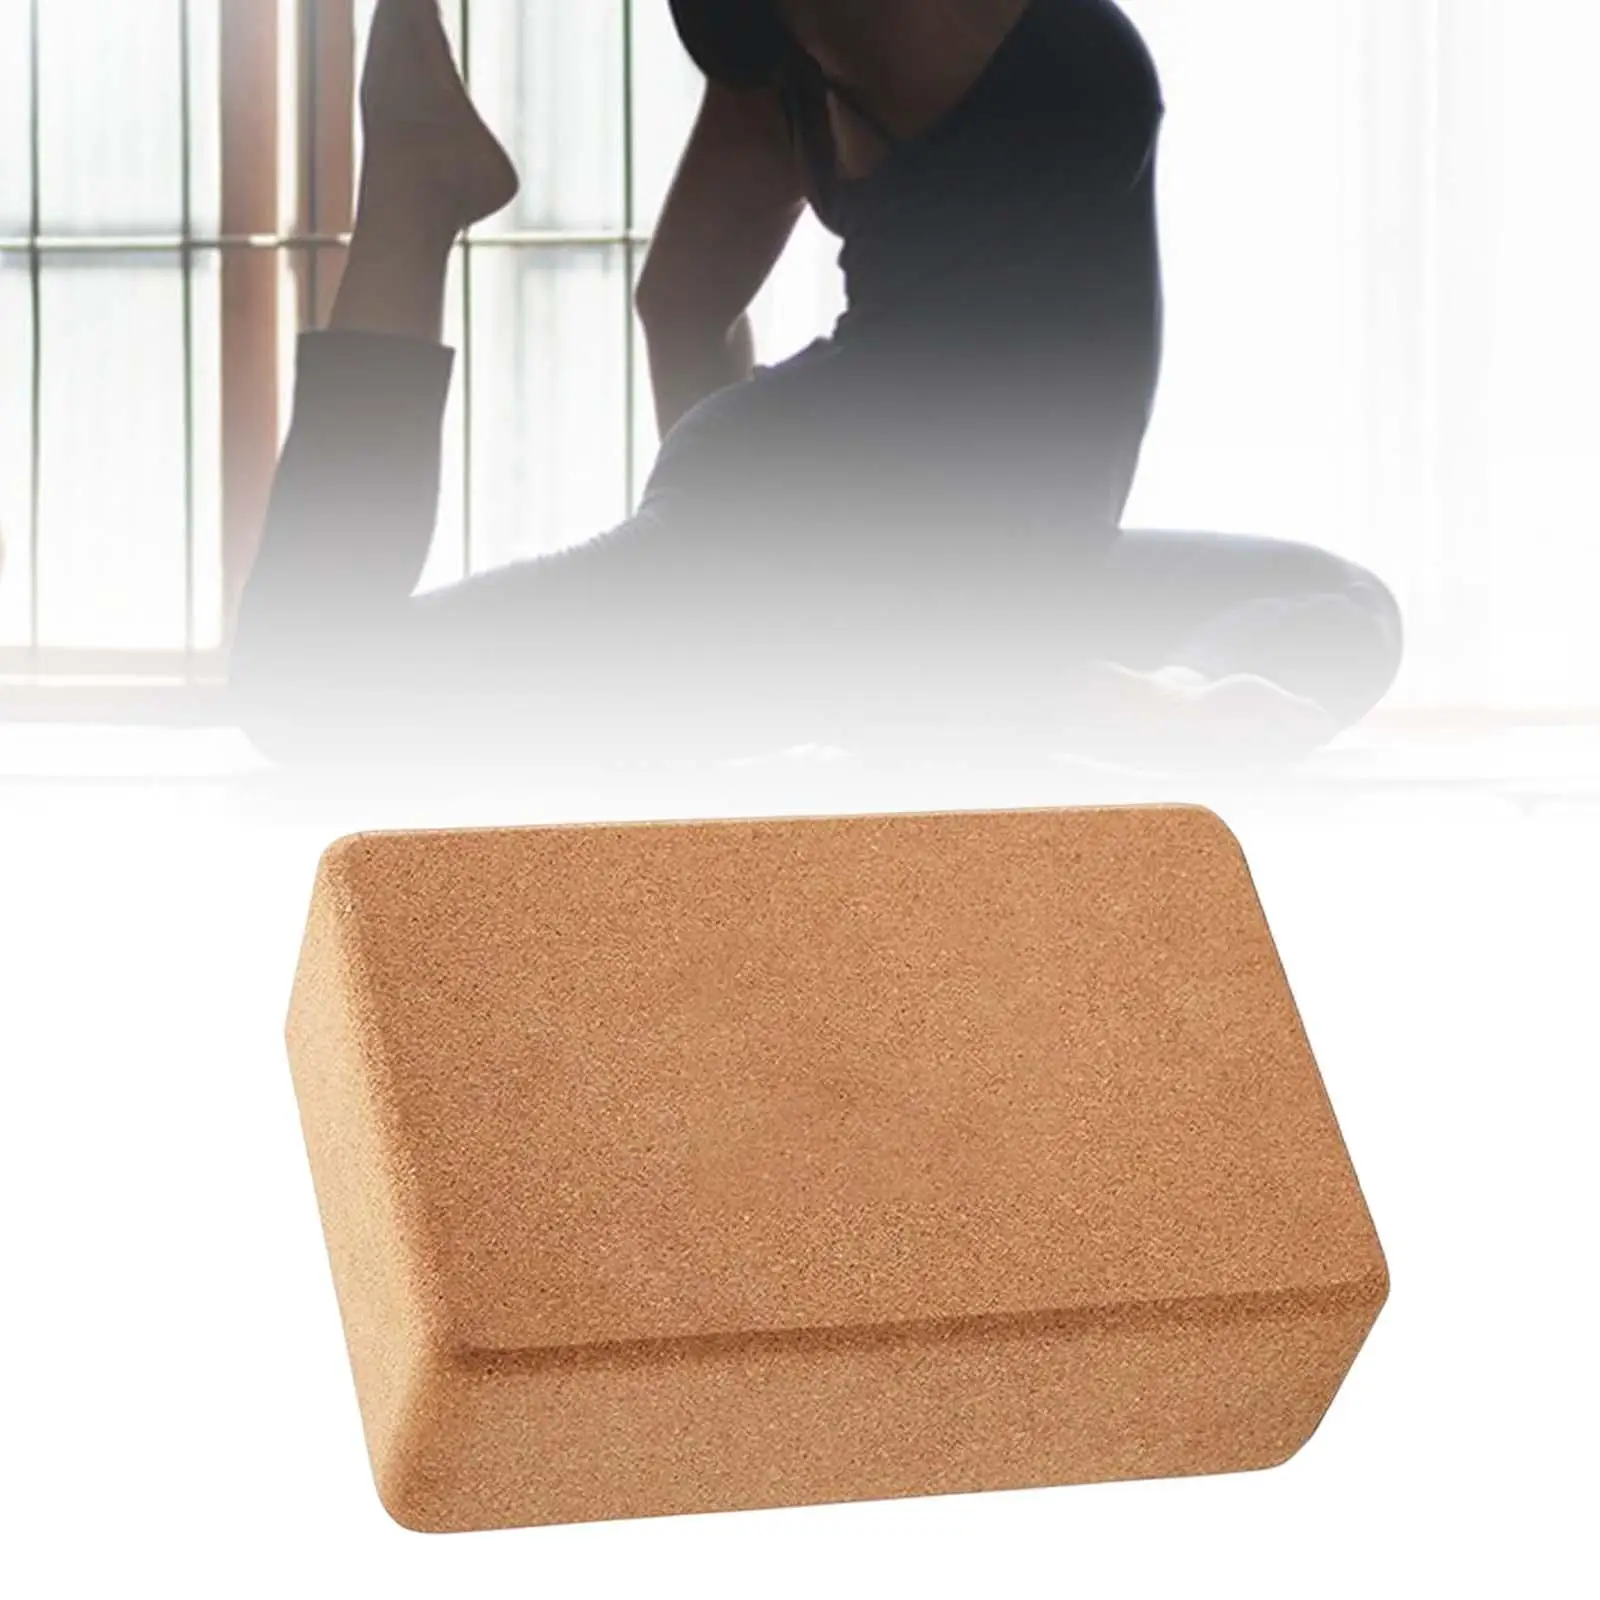 Yoga Brick Lightweight Squat Wedge Block for Stretching Gym Indoor Sports